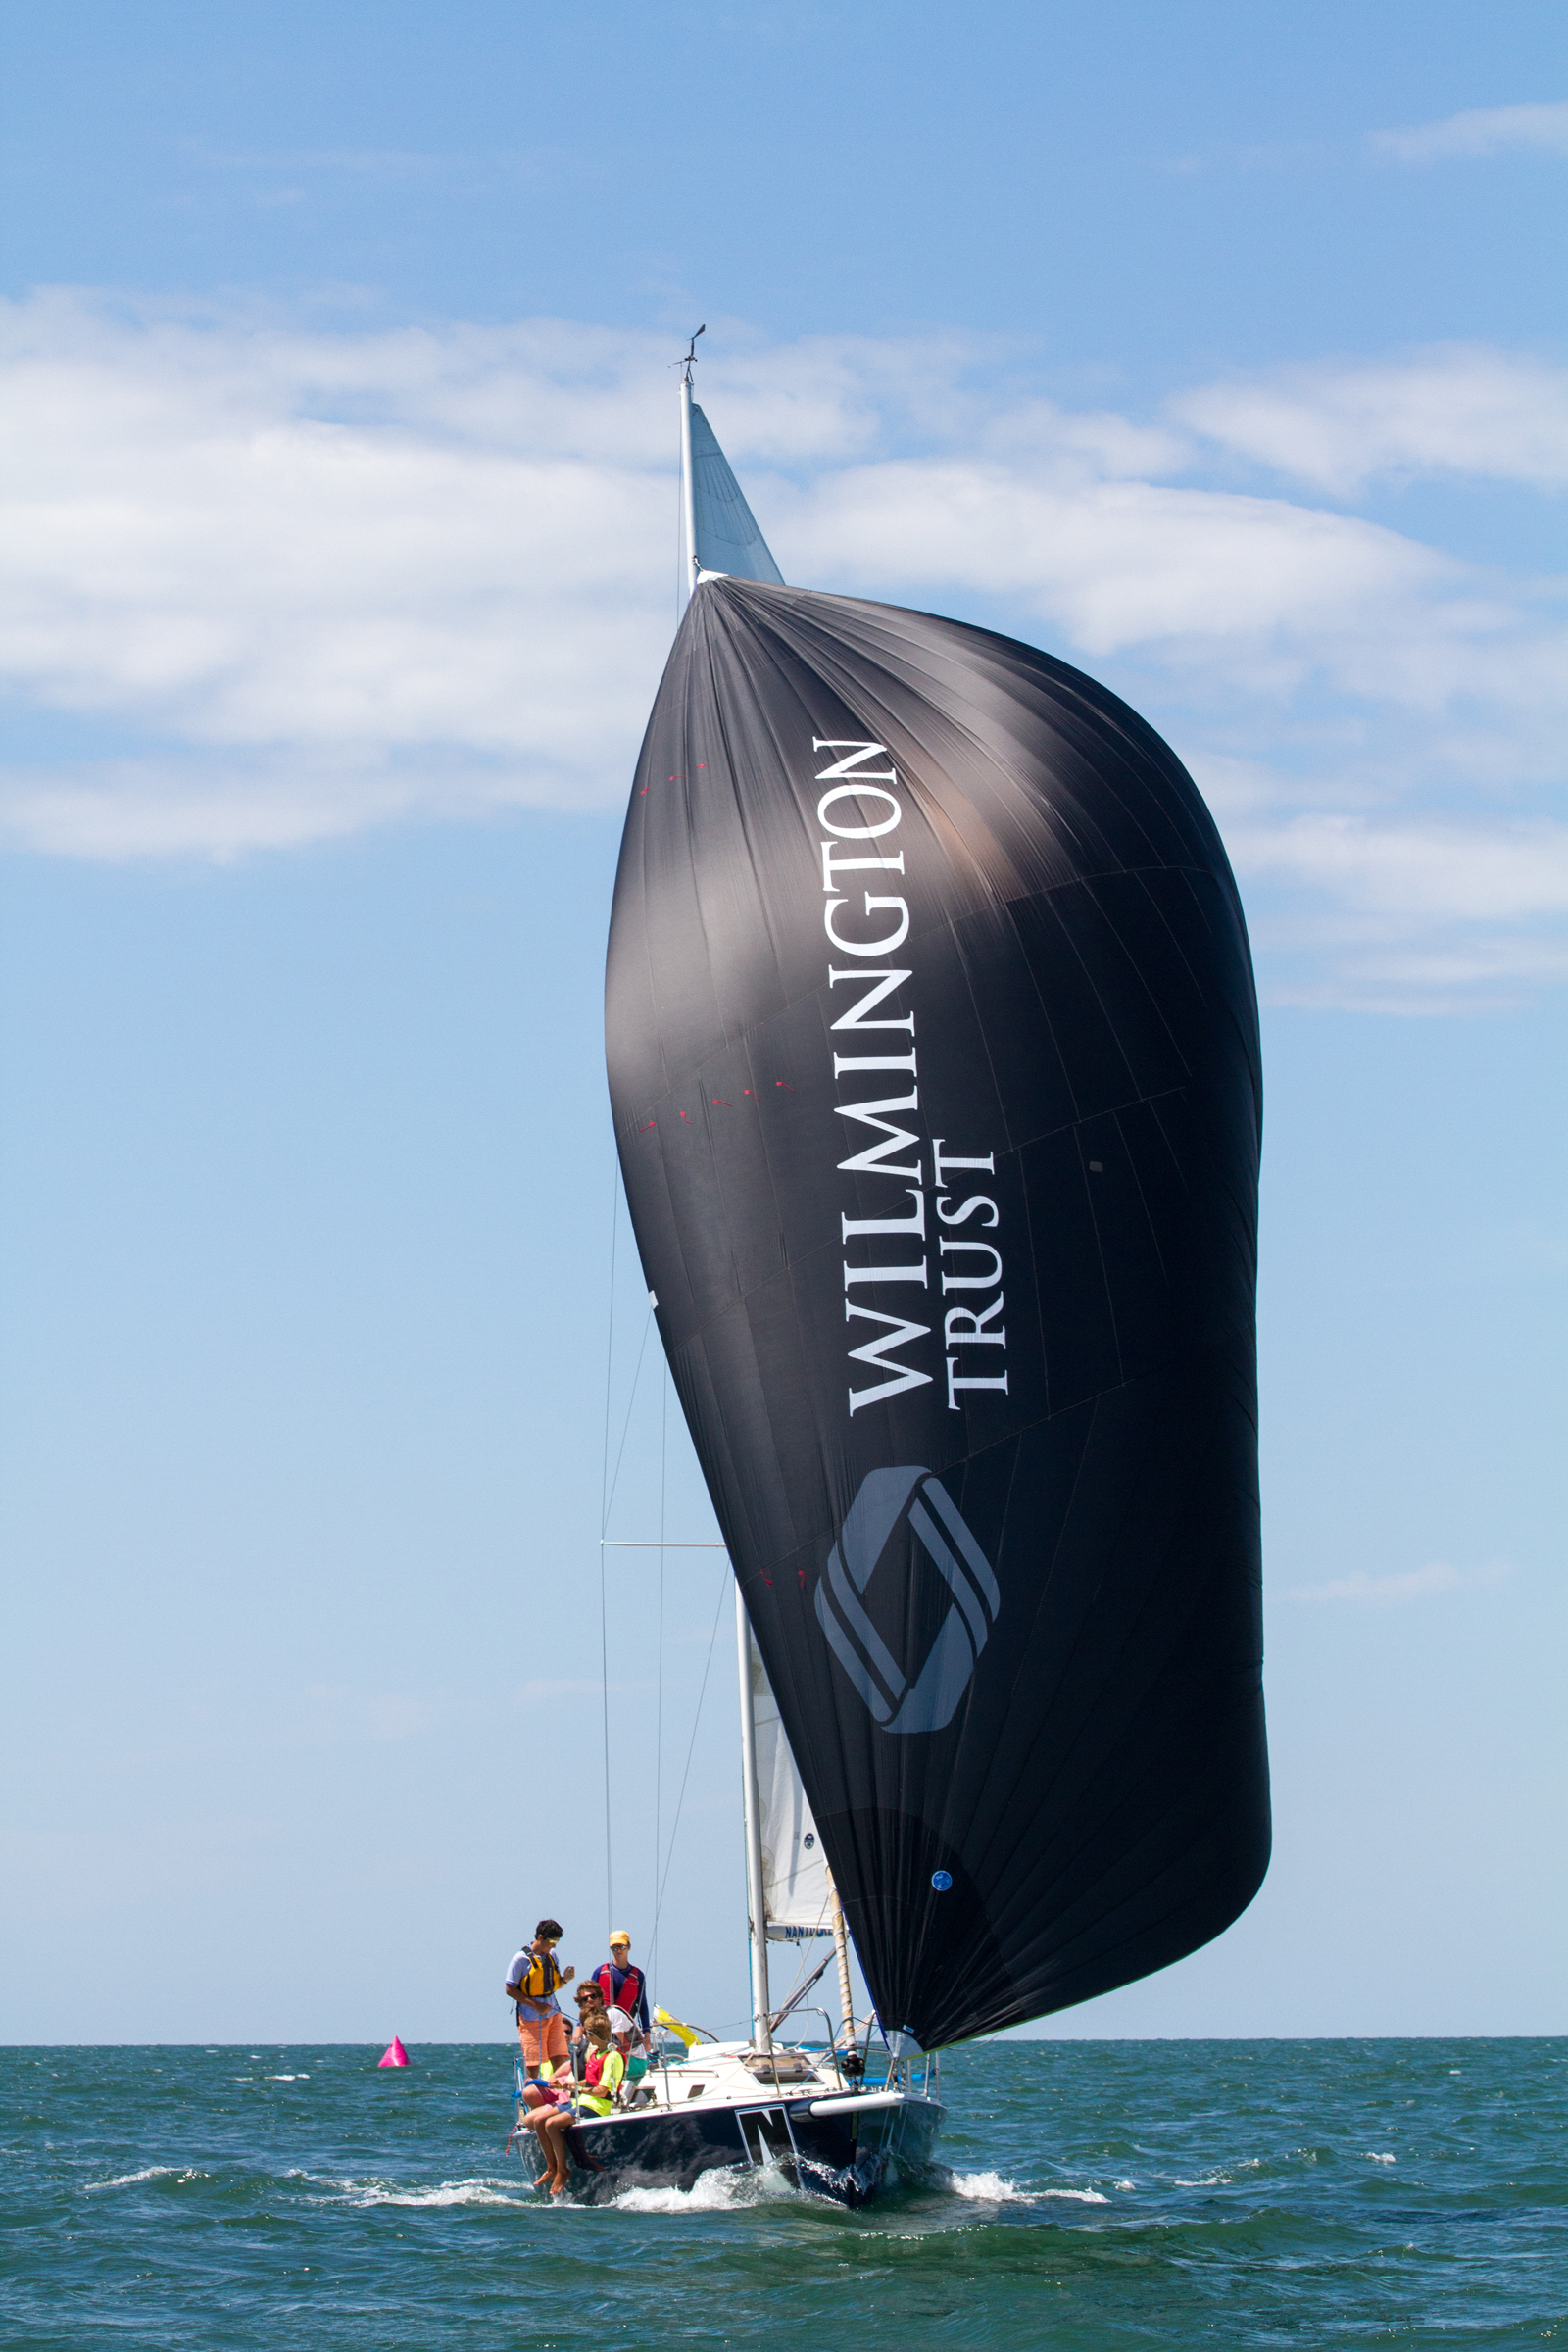 Wilmington Trust will award the “leader spinnaker” to the winning boat in each day’s heat for the J/105 fleet.